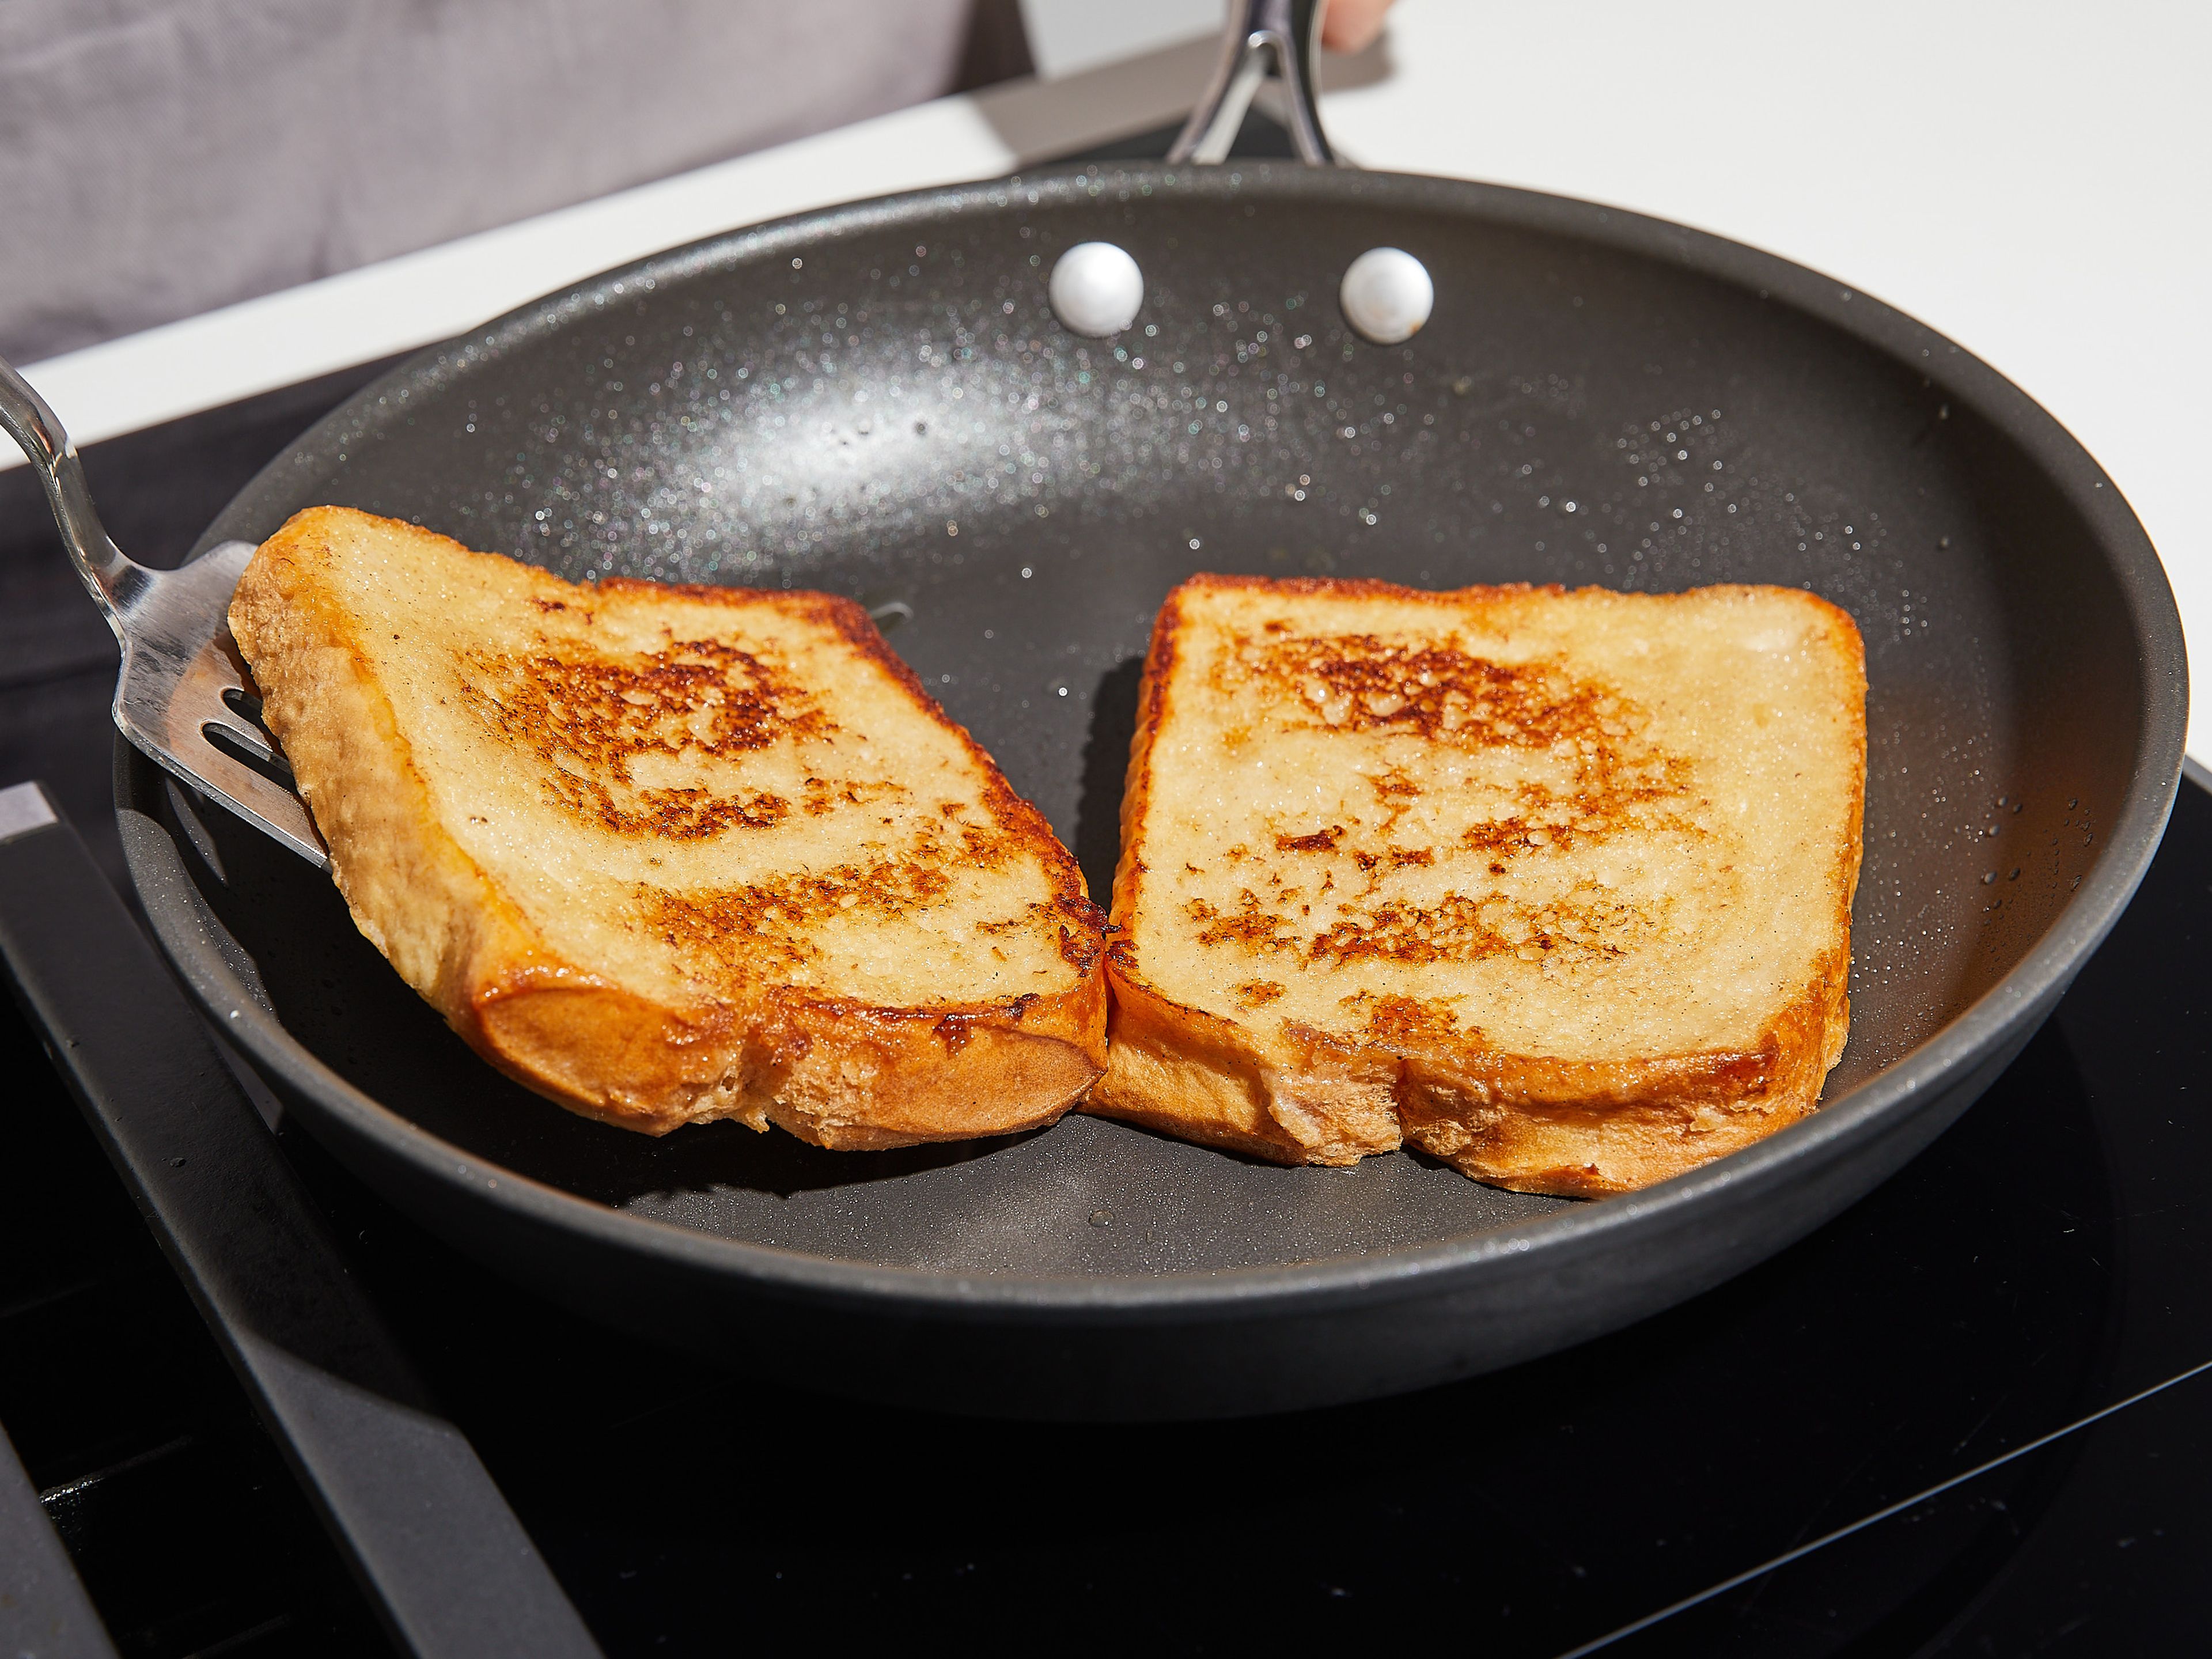 Melt some margarine in a frying pan over medium heat. Fry bread slices for approx. 3–5 min. on each side until golden brown. If necessary, re-grease the pan with more margarine. Serve French toast with caramelized bananas and enjoy immediately.